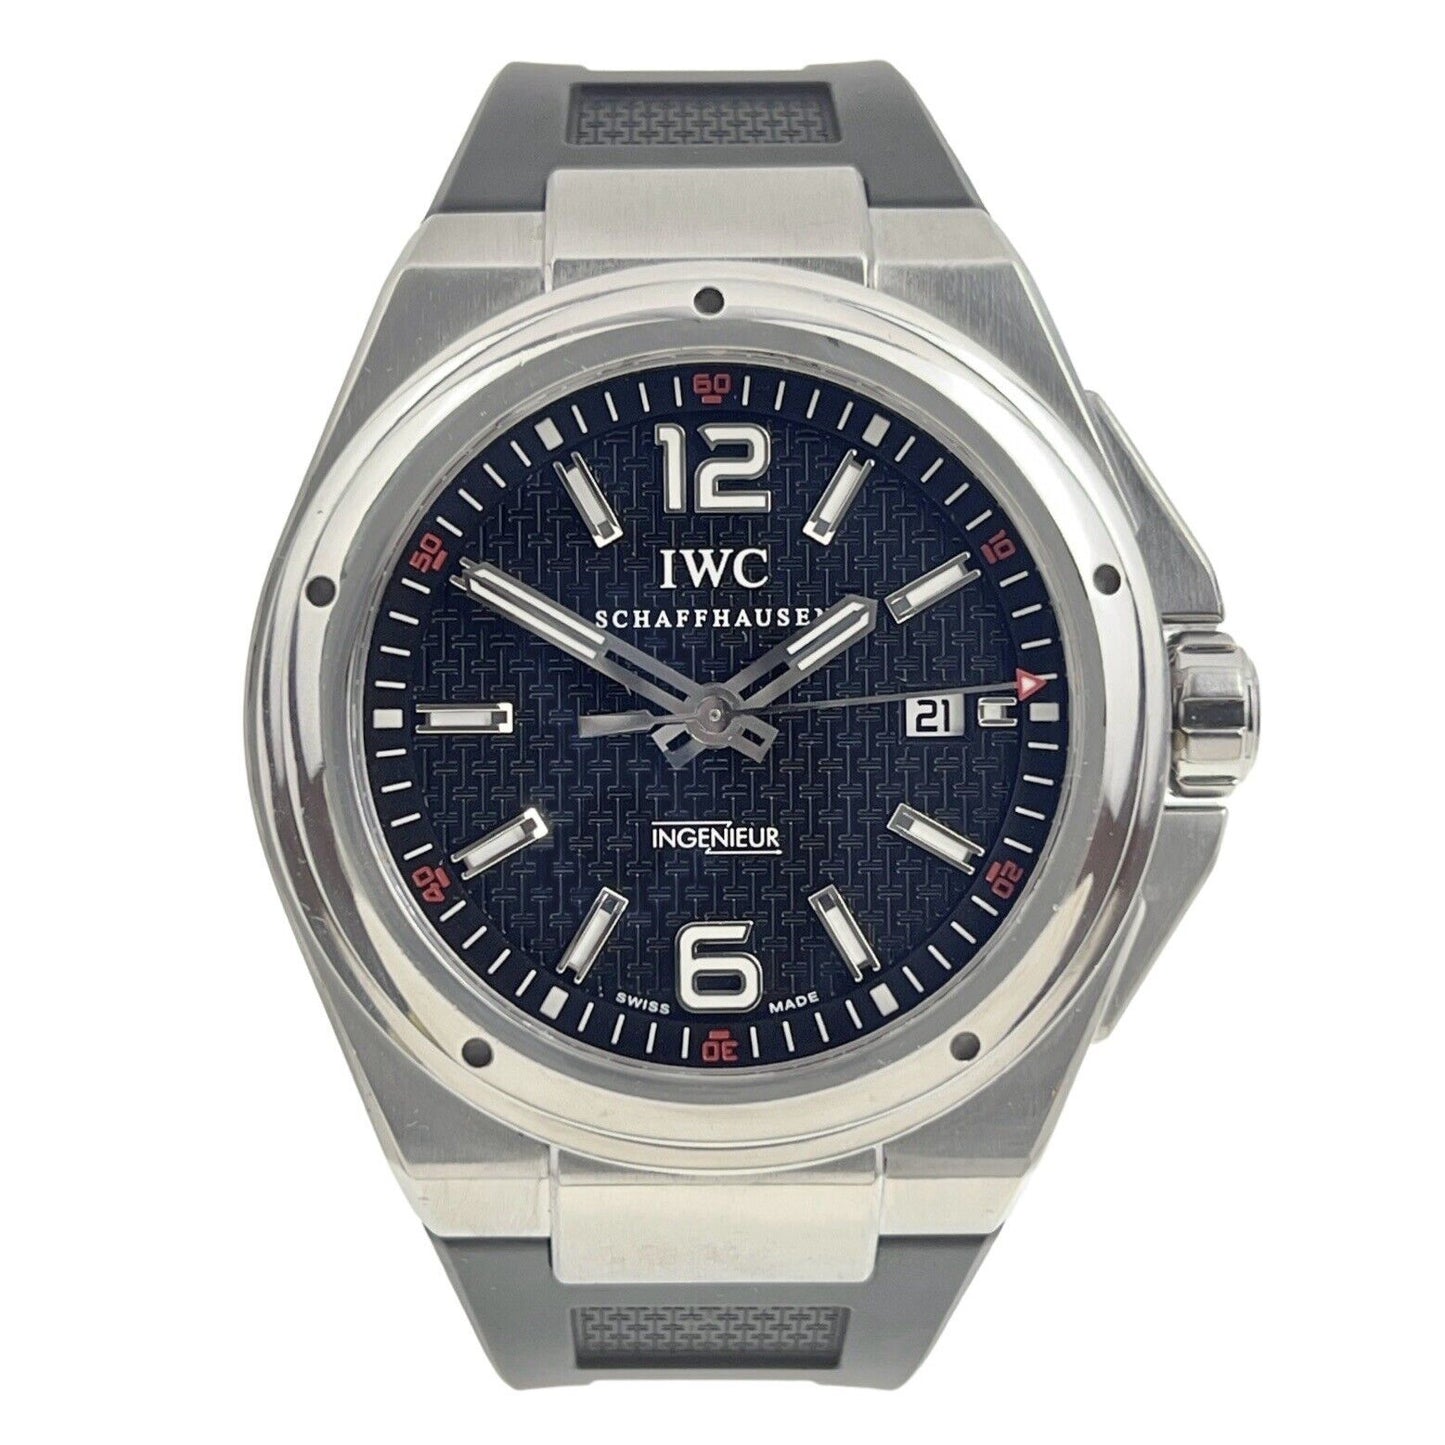 IWC Ingenieur Stainless Steel 46mm Black Dial Automatic Men’s Watch IW323601